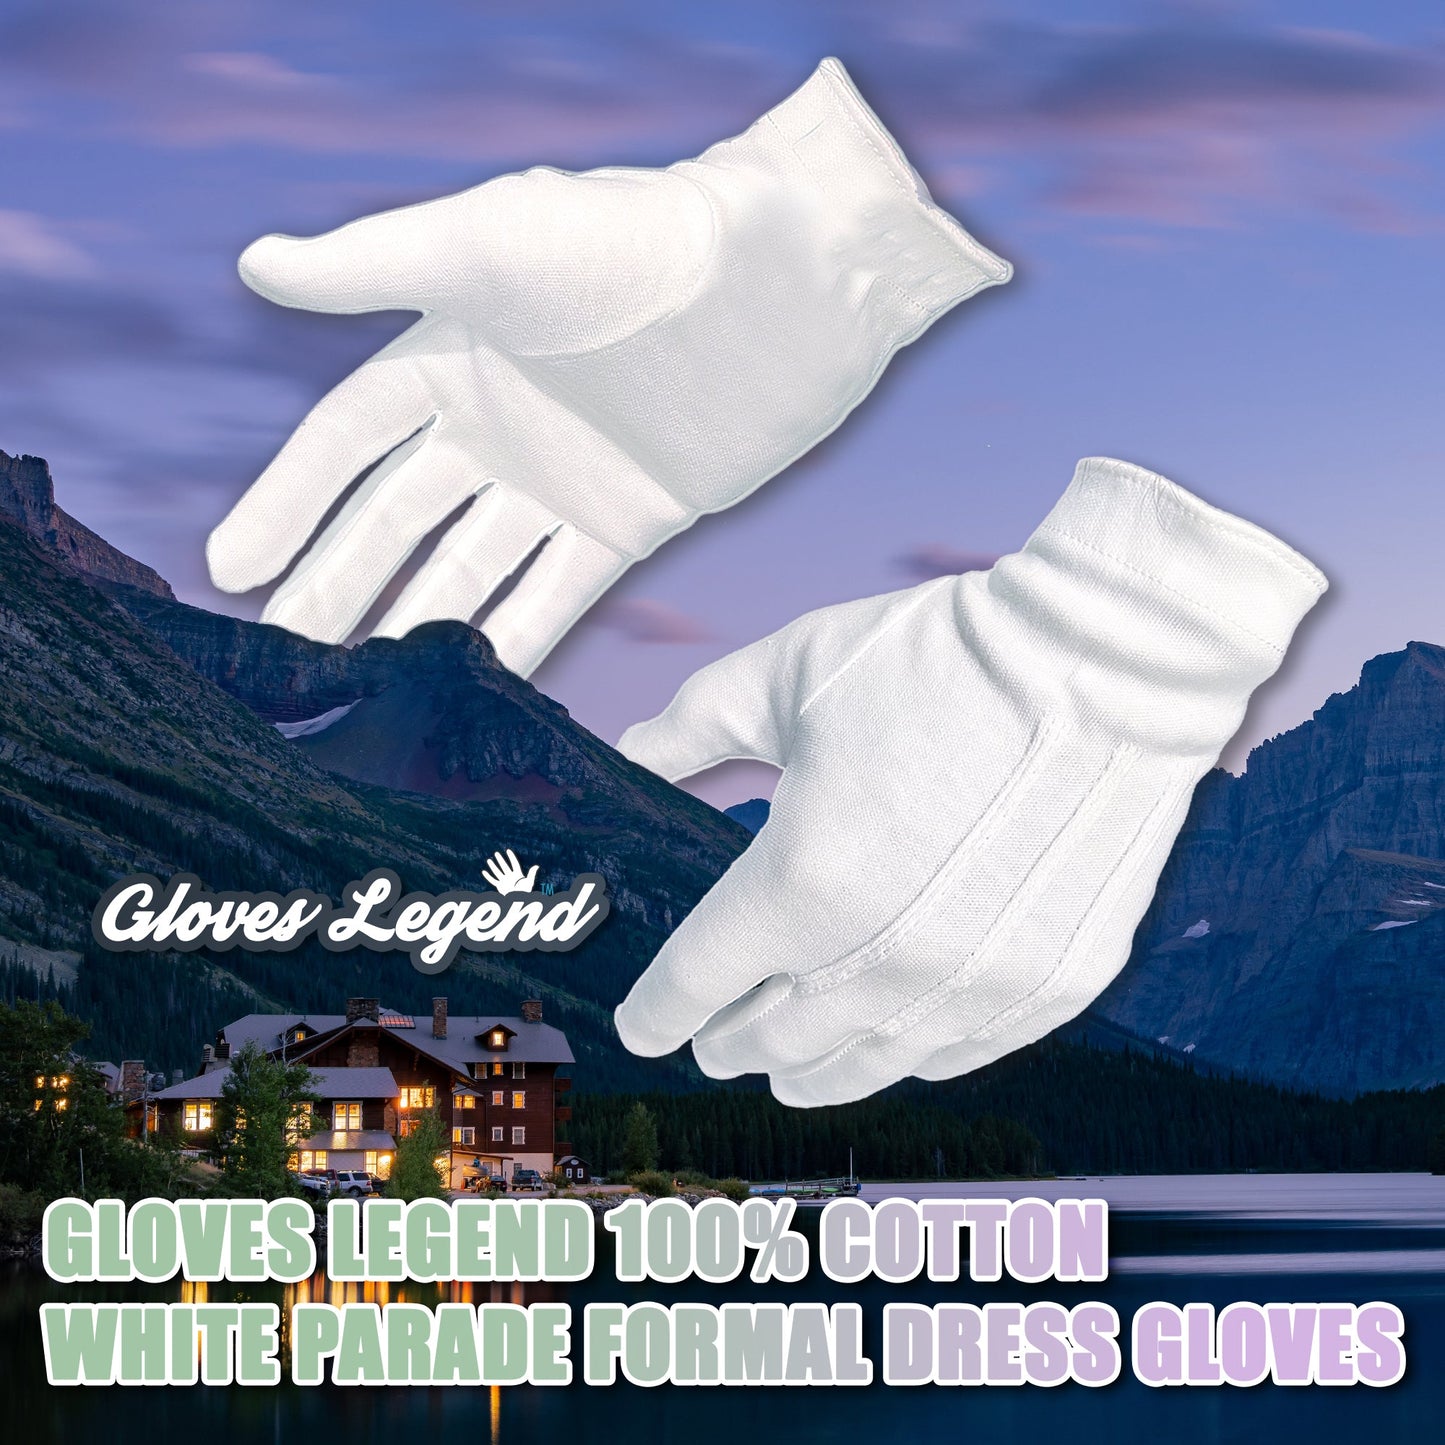 10 Pairs (20 Gloves) Size Large - Gloves Legend 100% White Cotton Marching Parade Formal Dress Gloves